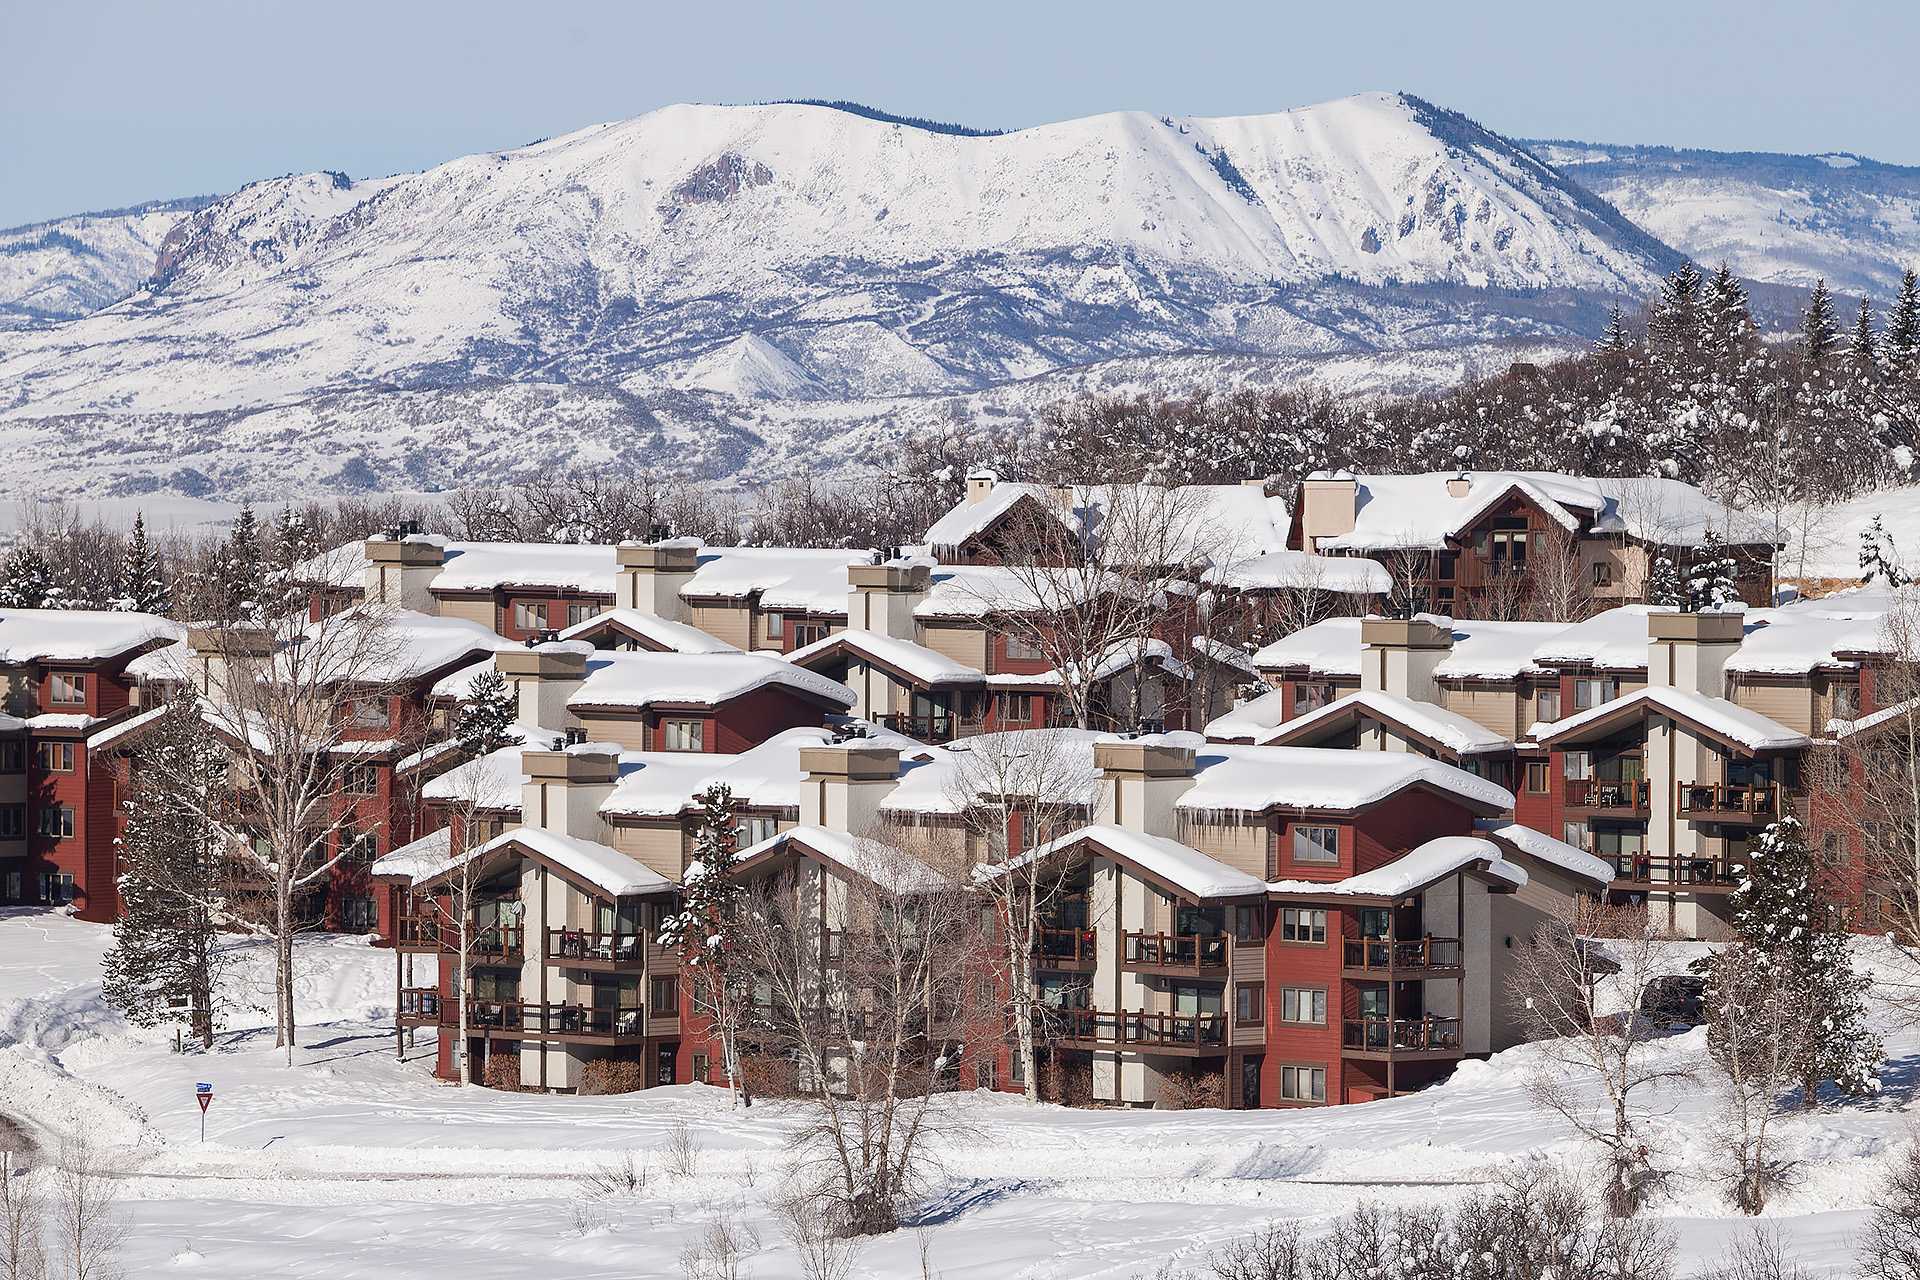 Steamboat Springs Homeowners' Association Management